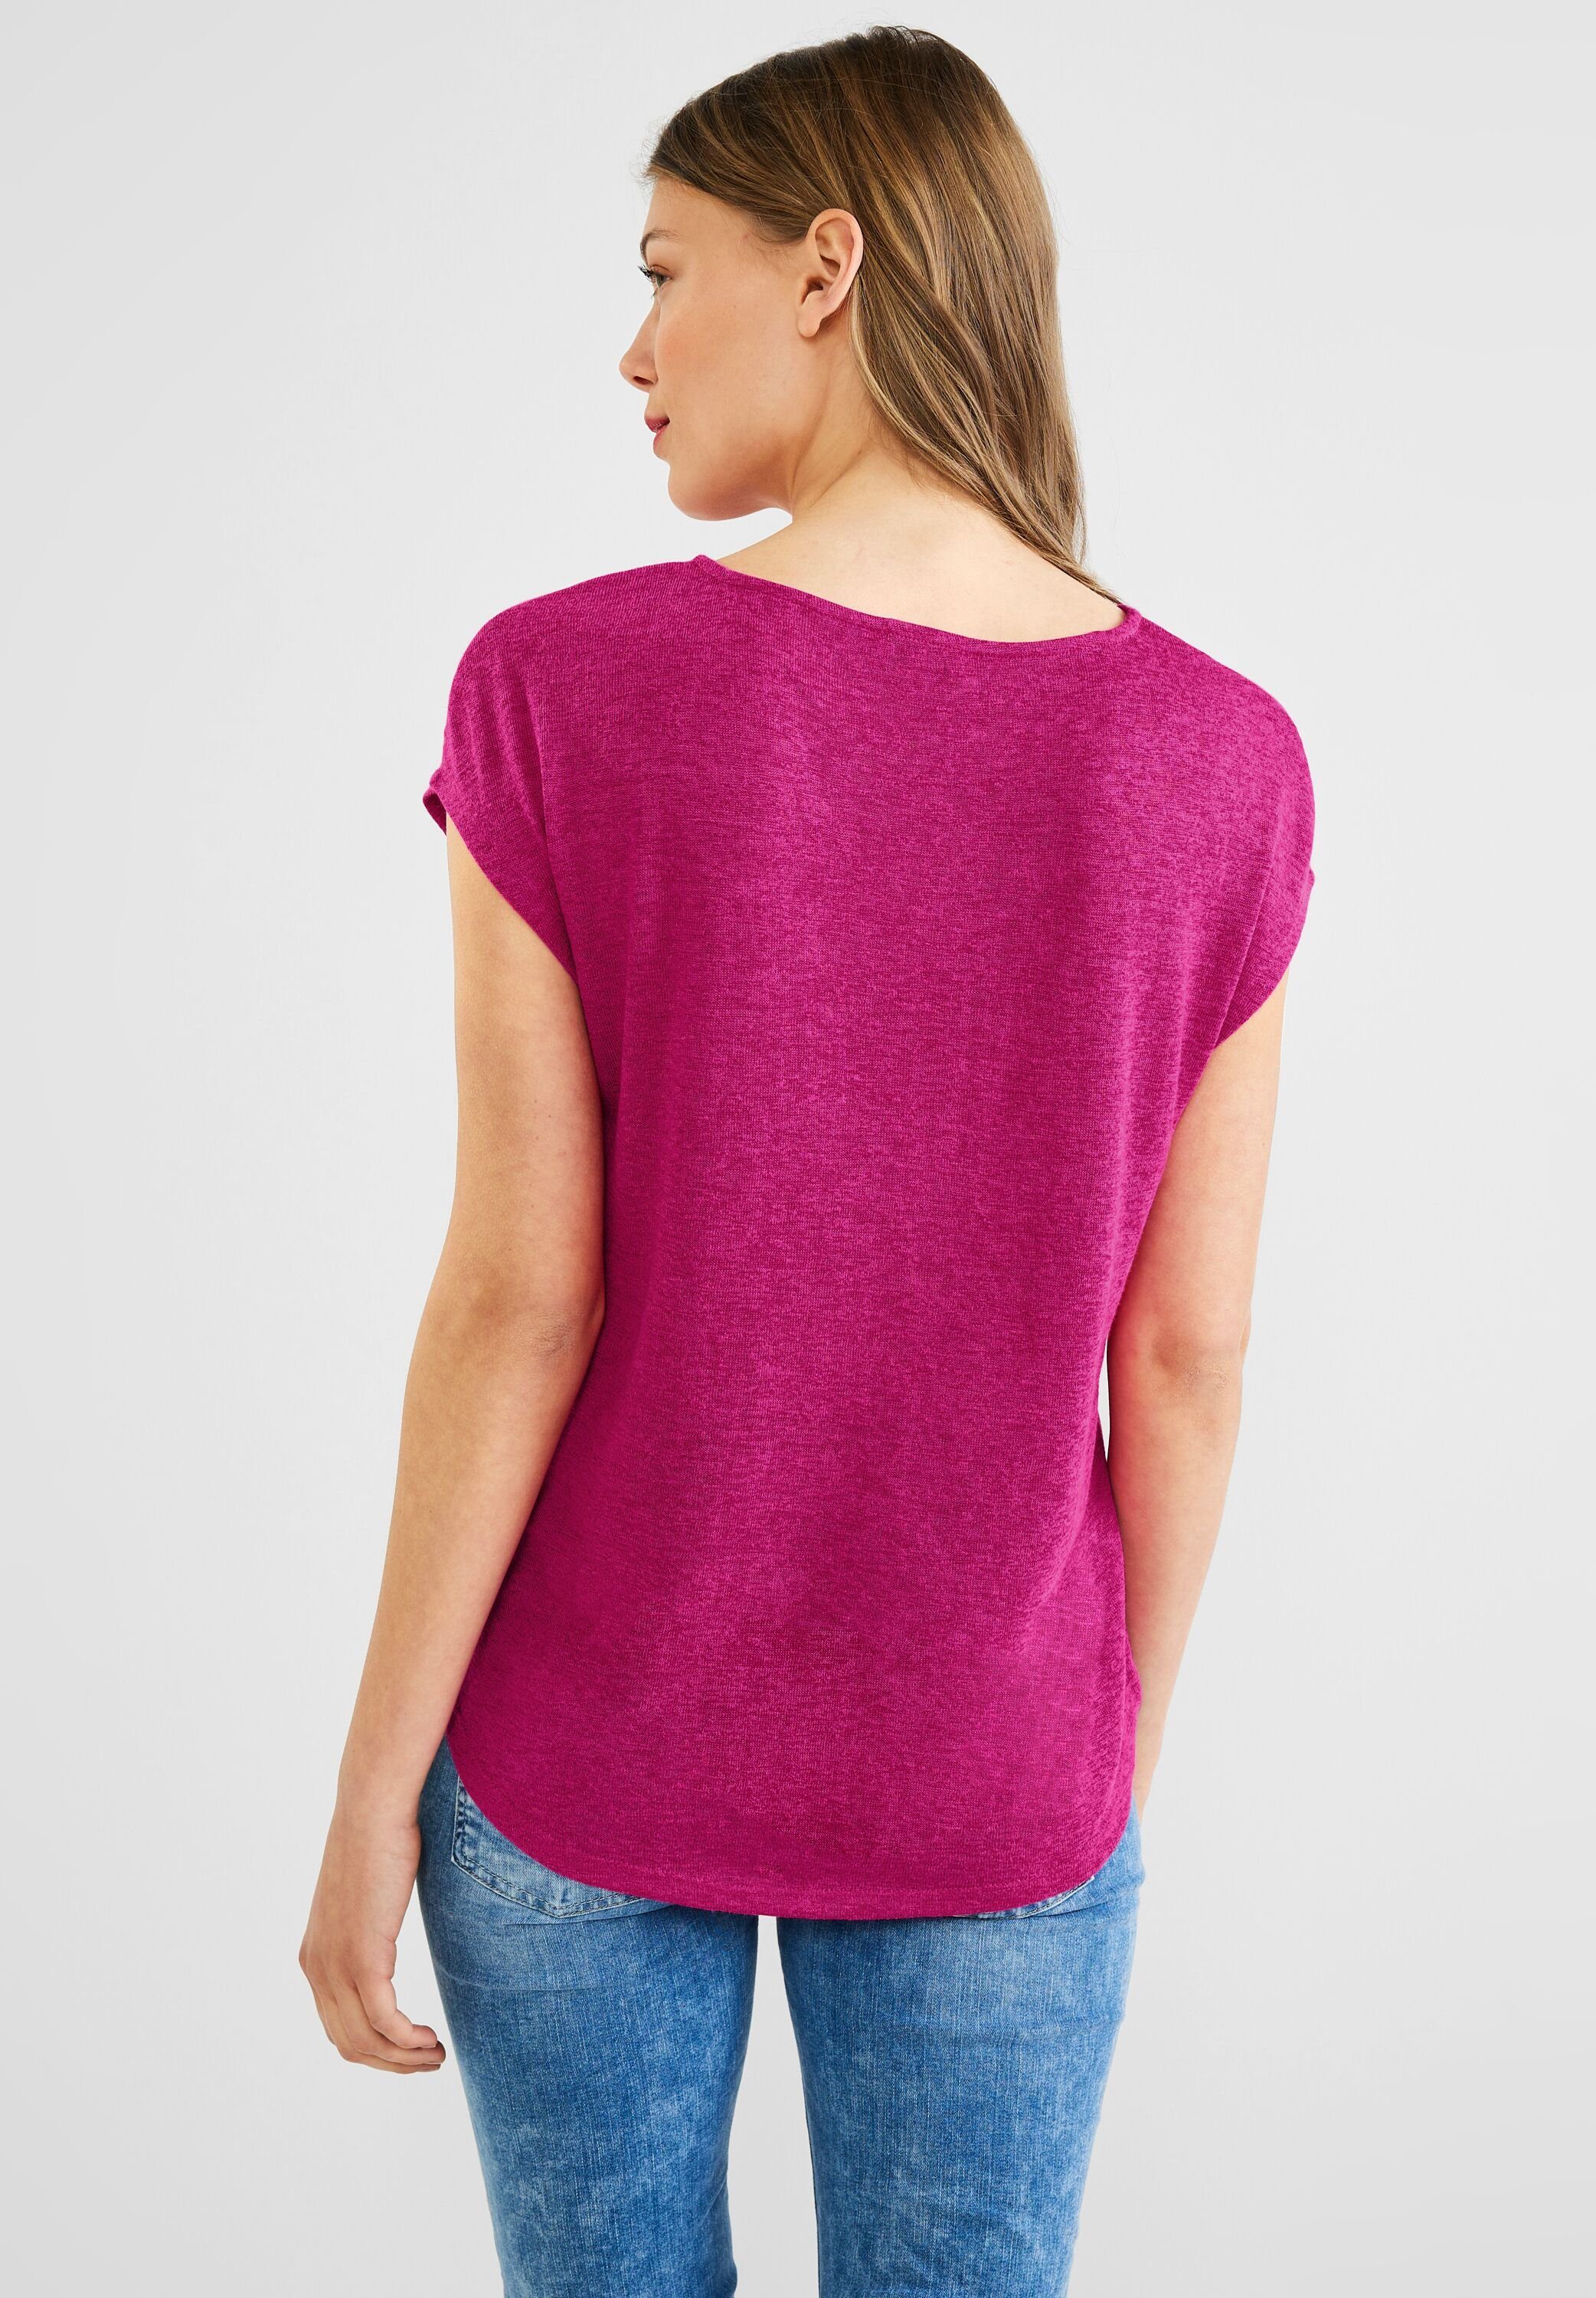 STREET ONE V-Shirt in Unifarbe pink oasis